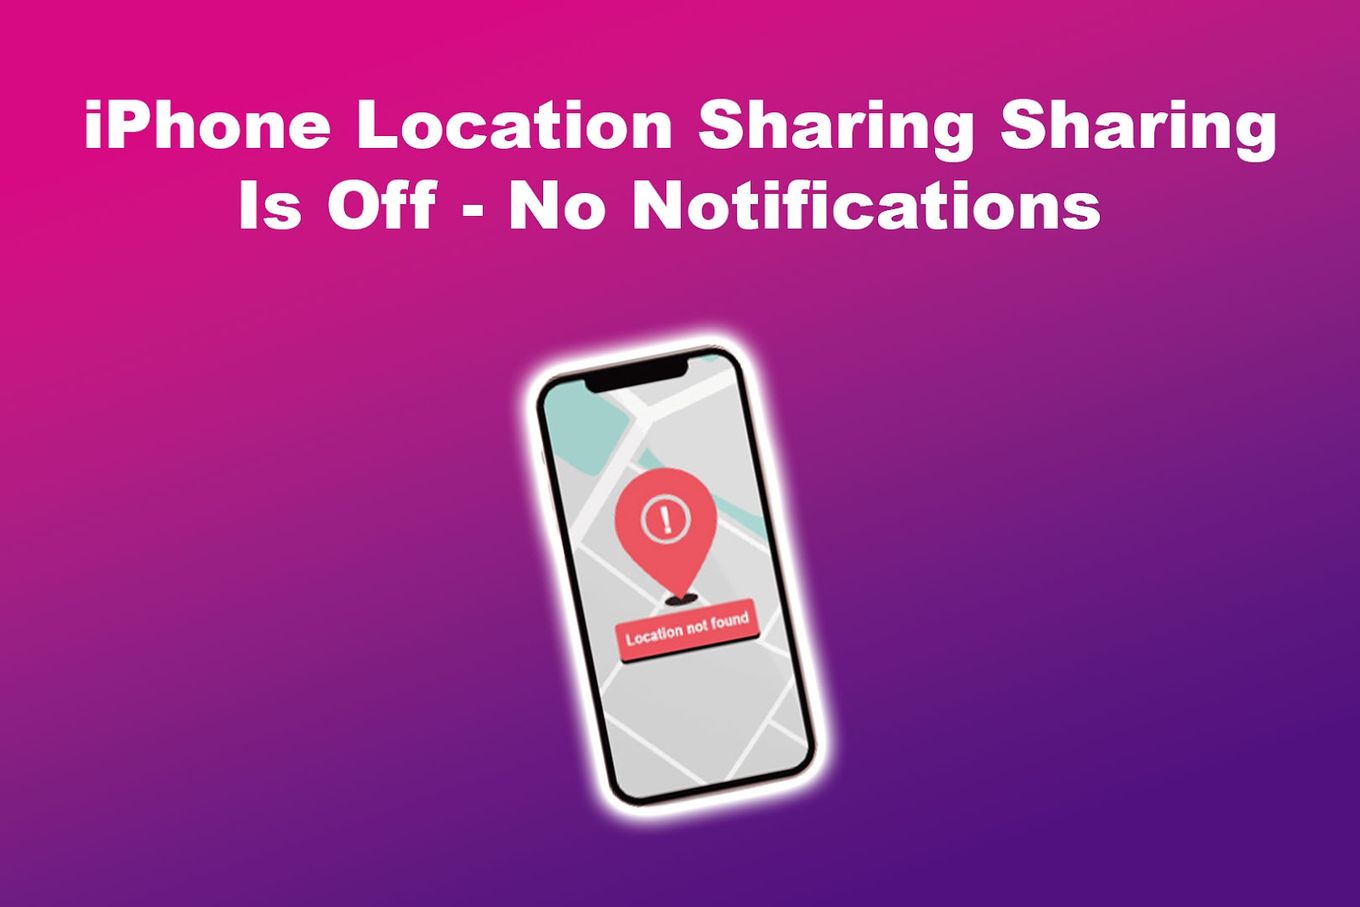 iPhone Location Sharing Sharing Is Off - No Notifications